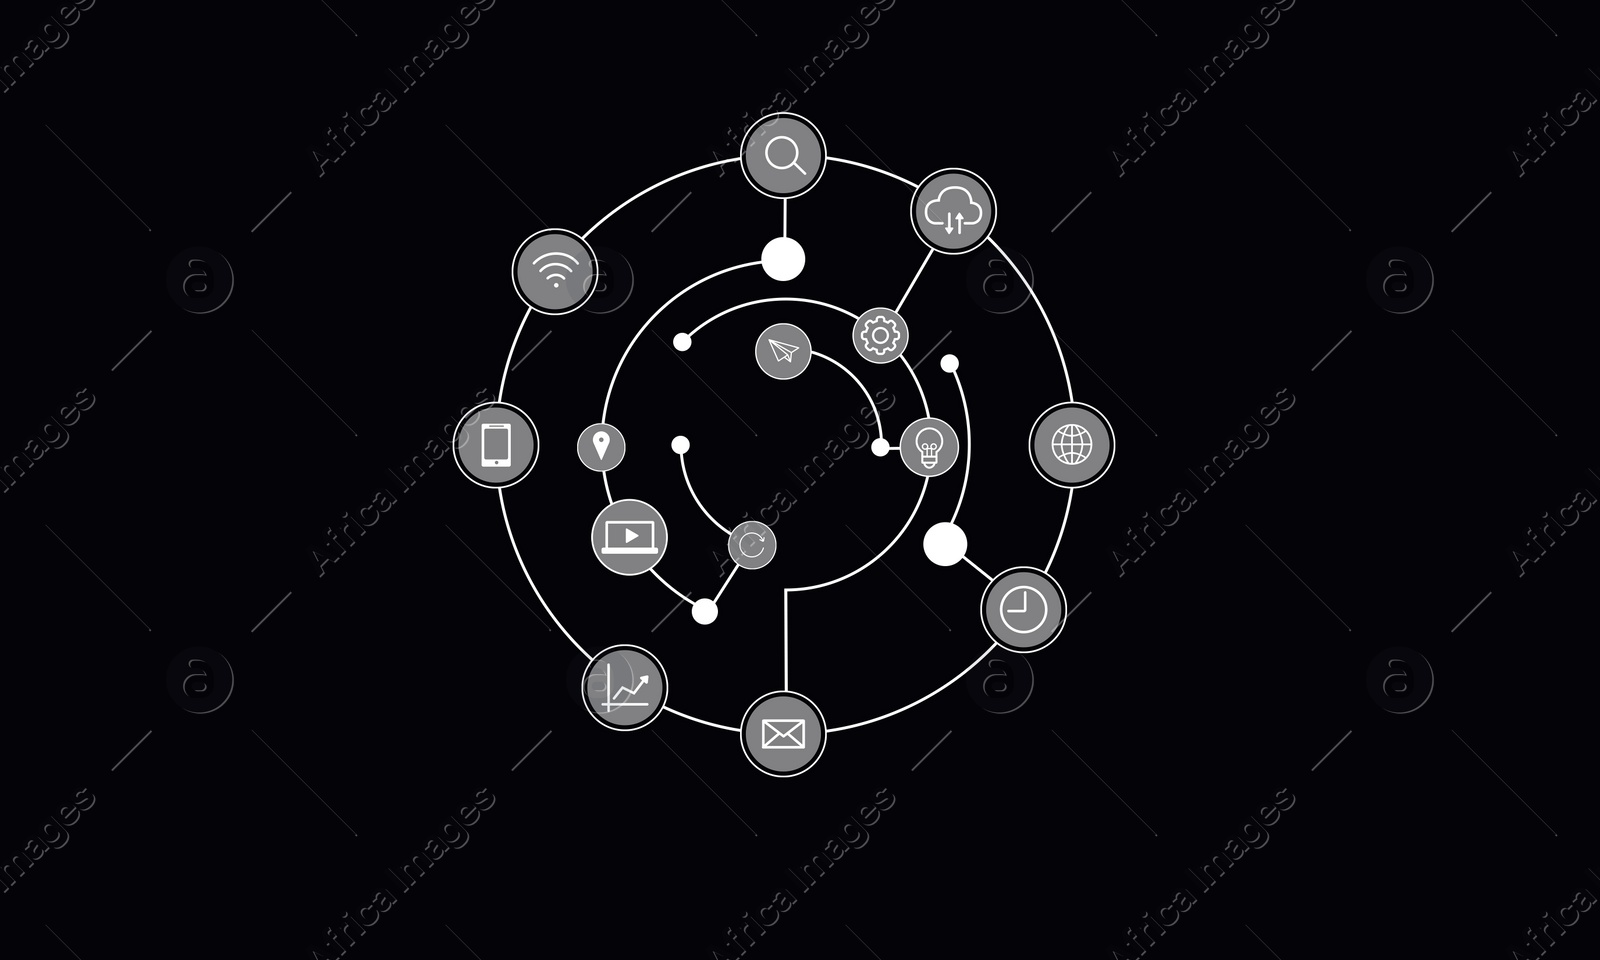 Illustration of Digital marketing directions. Scheme with icons on black background